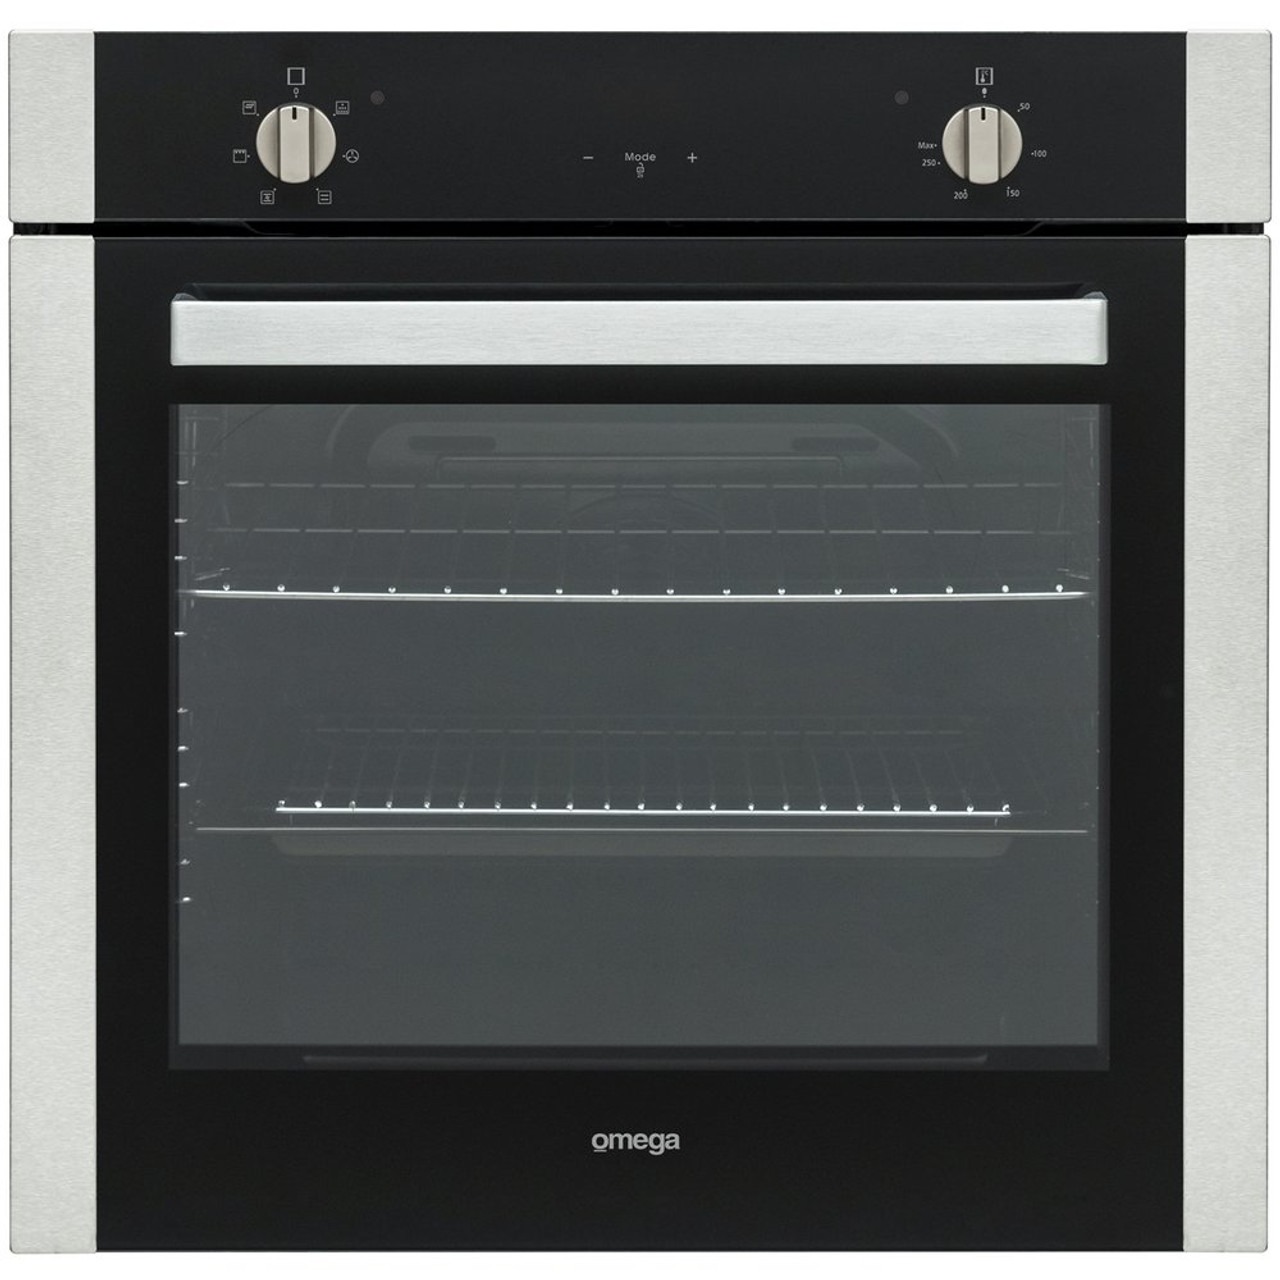 OBO606M - 60cm 6 Function Oven - Stainless steel